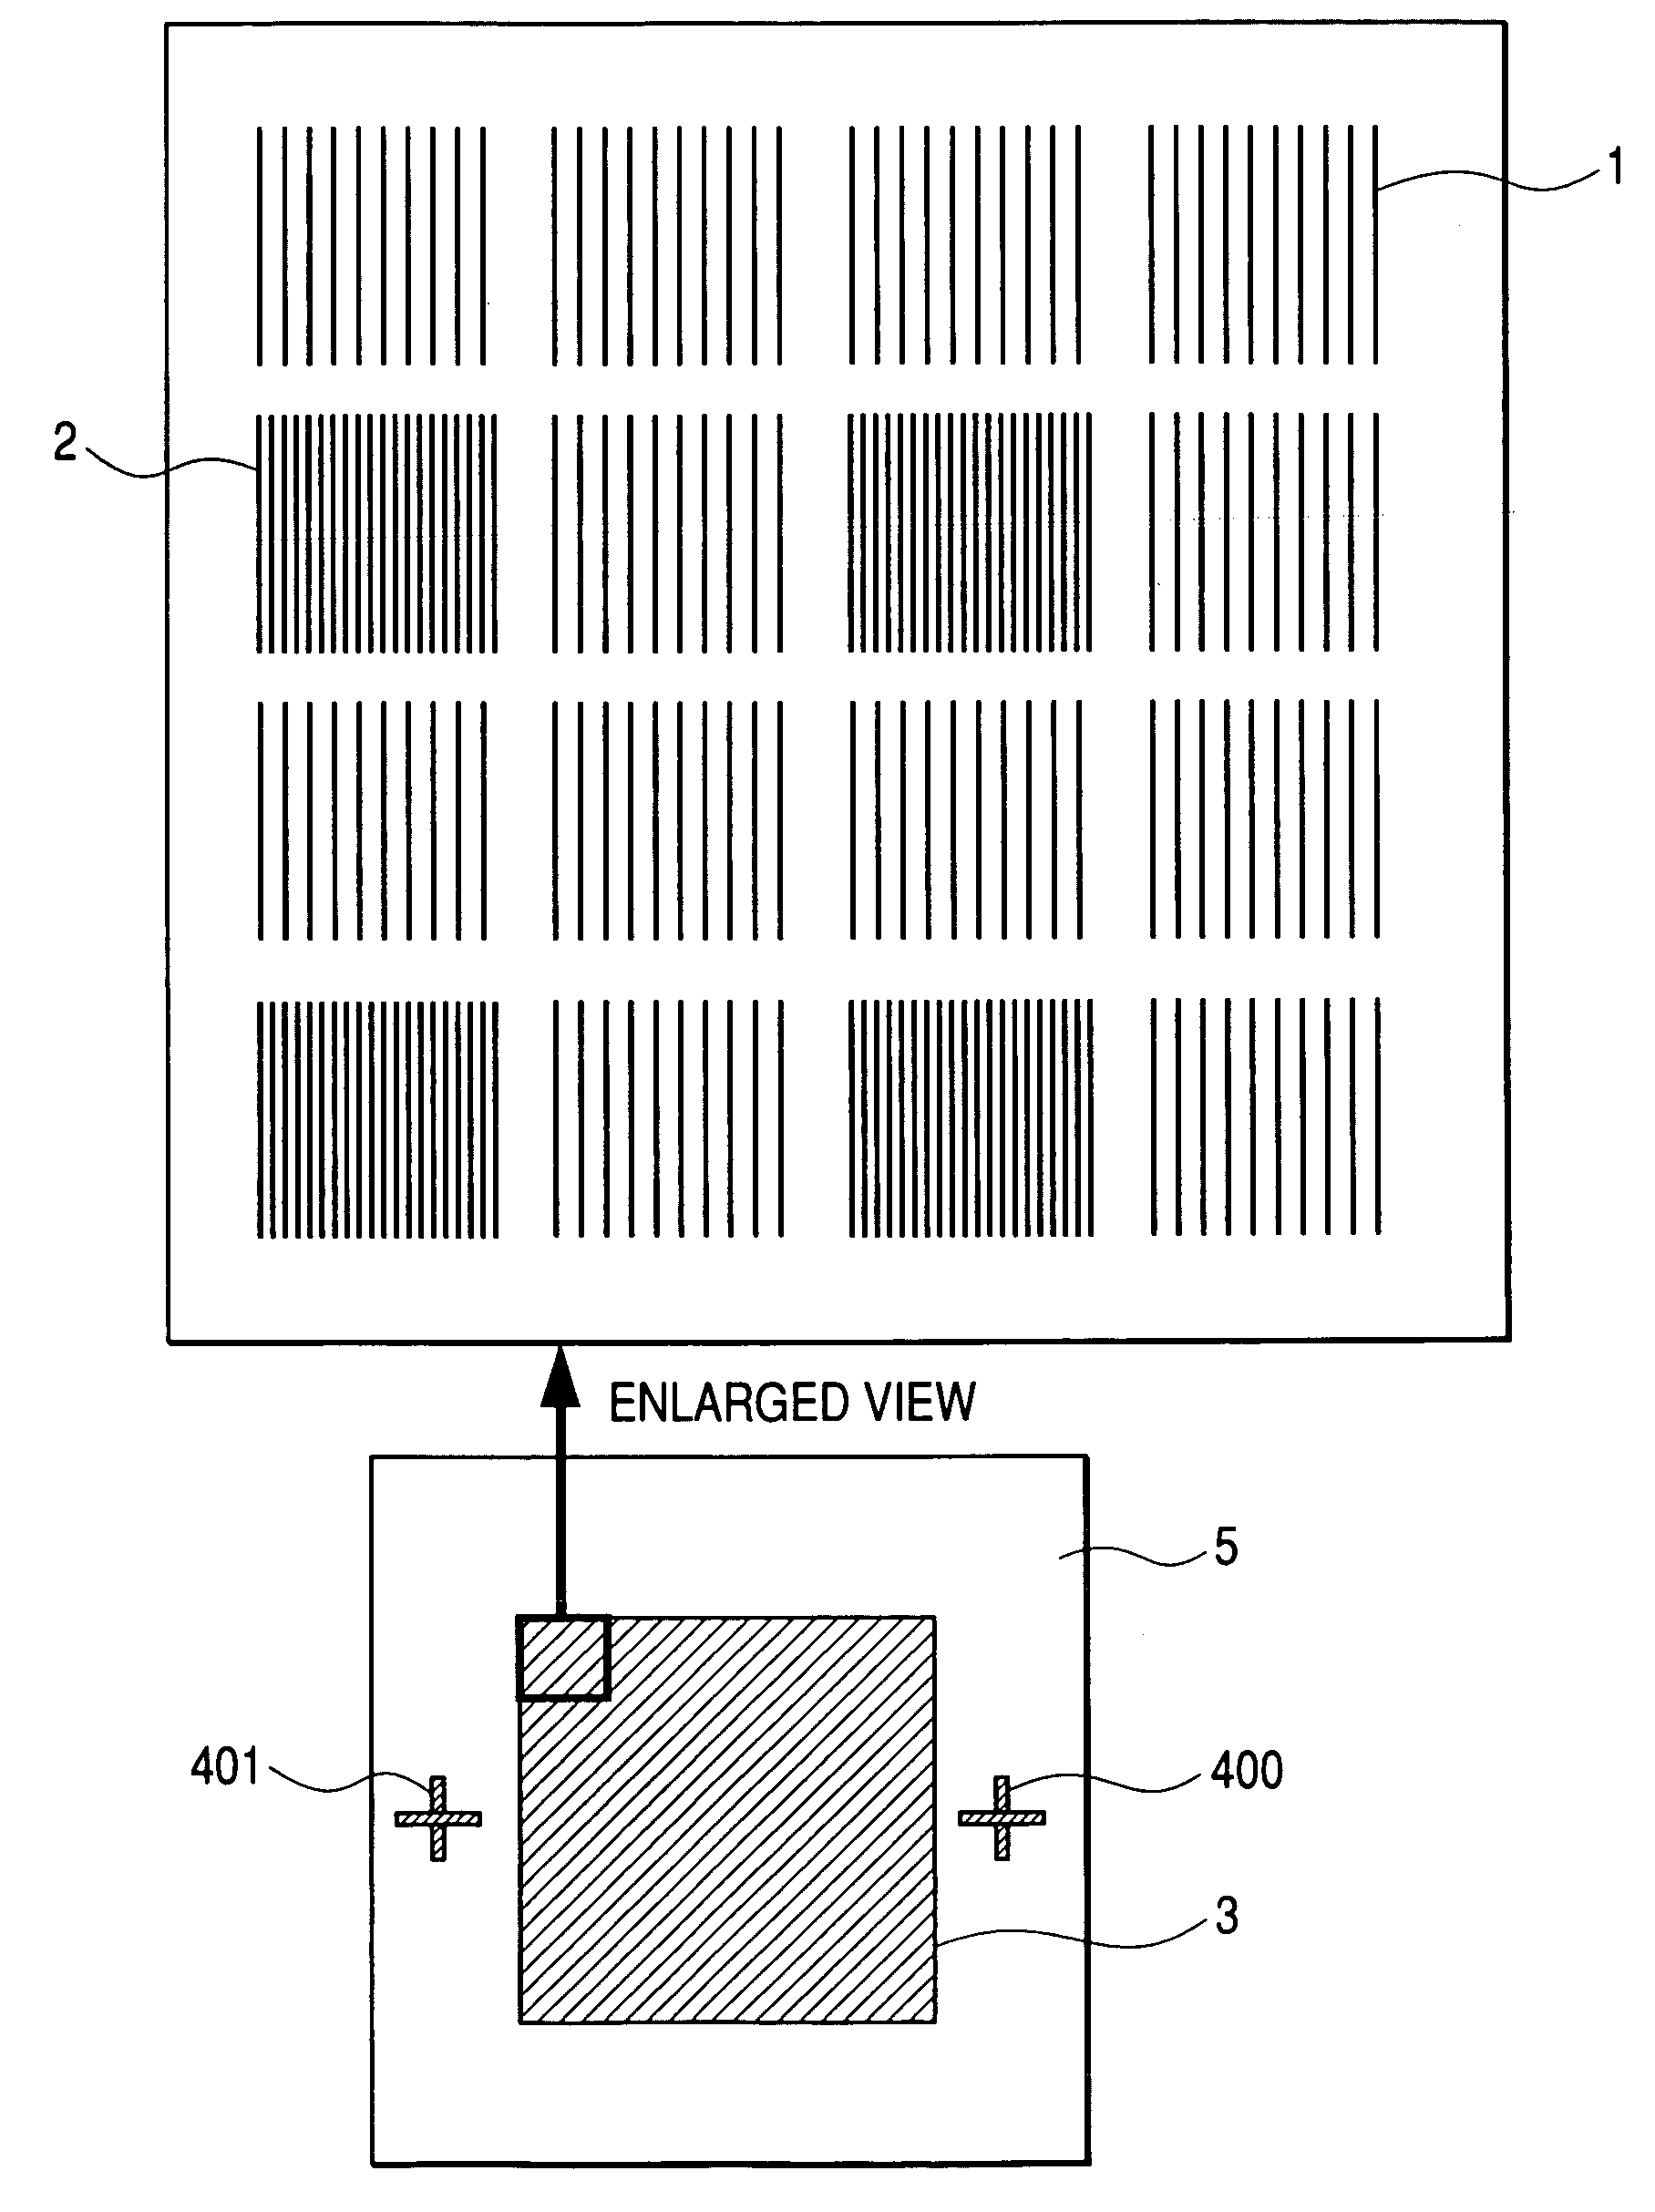 Standard reference for metrology and calibration method of electron-beam metrology system using the same